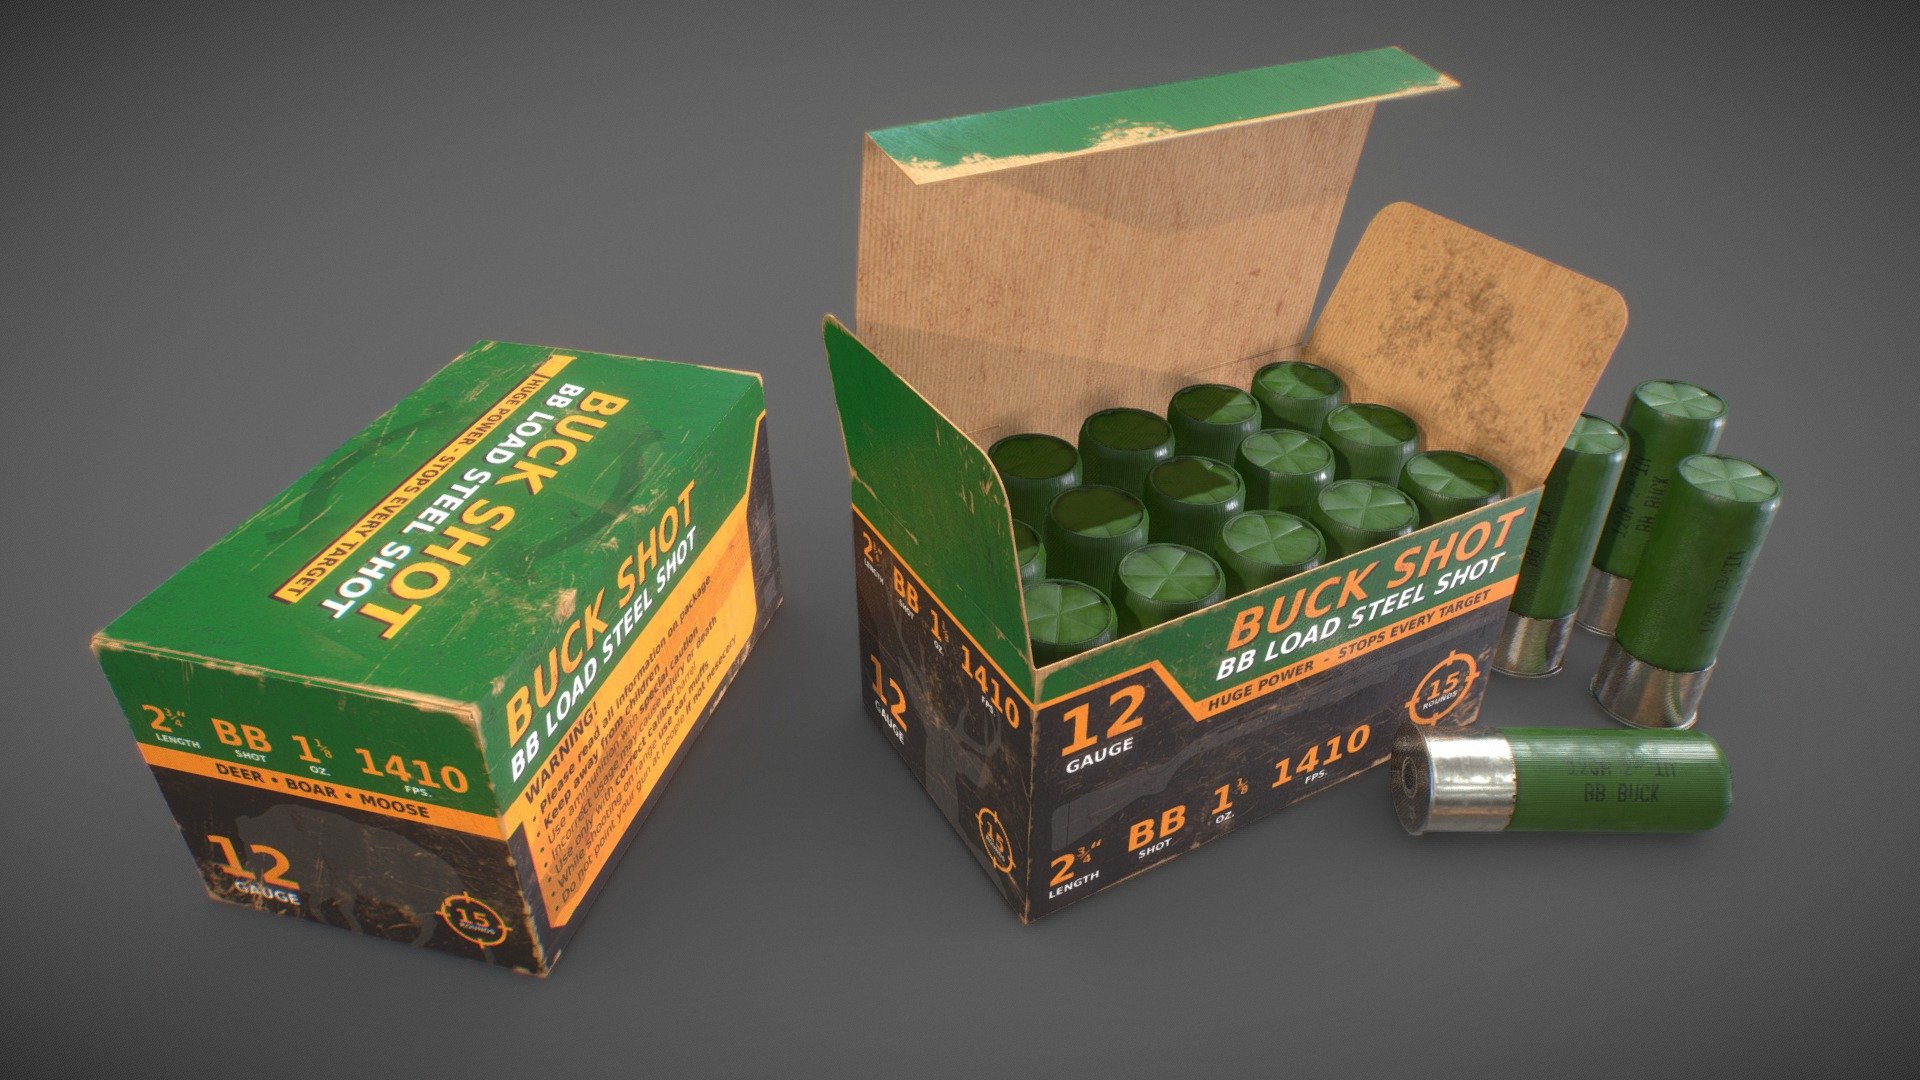 Game Art Asset. 
Shotgun ammunition box containing 12 gauge plastic shells. Opened and closed variants.
Pack includes 2048x2048k textures for the box and shells 3d model